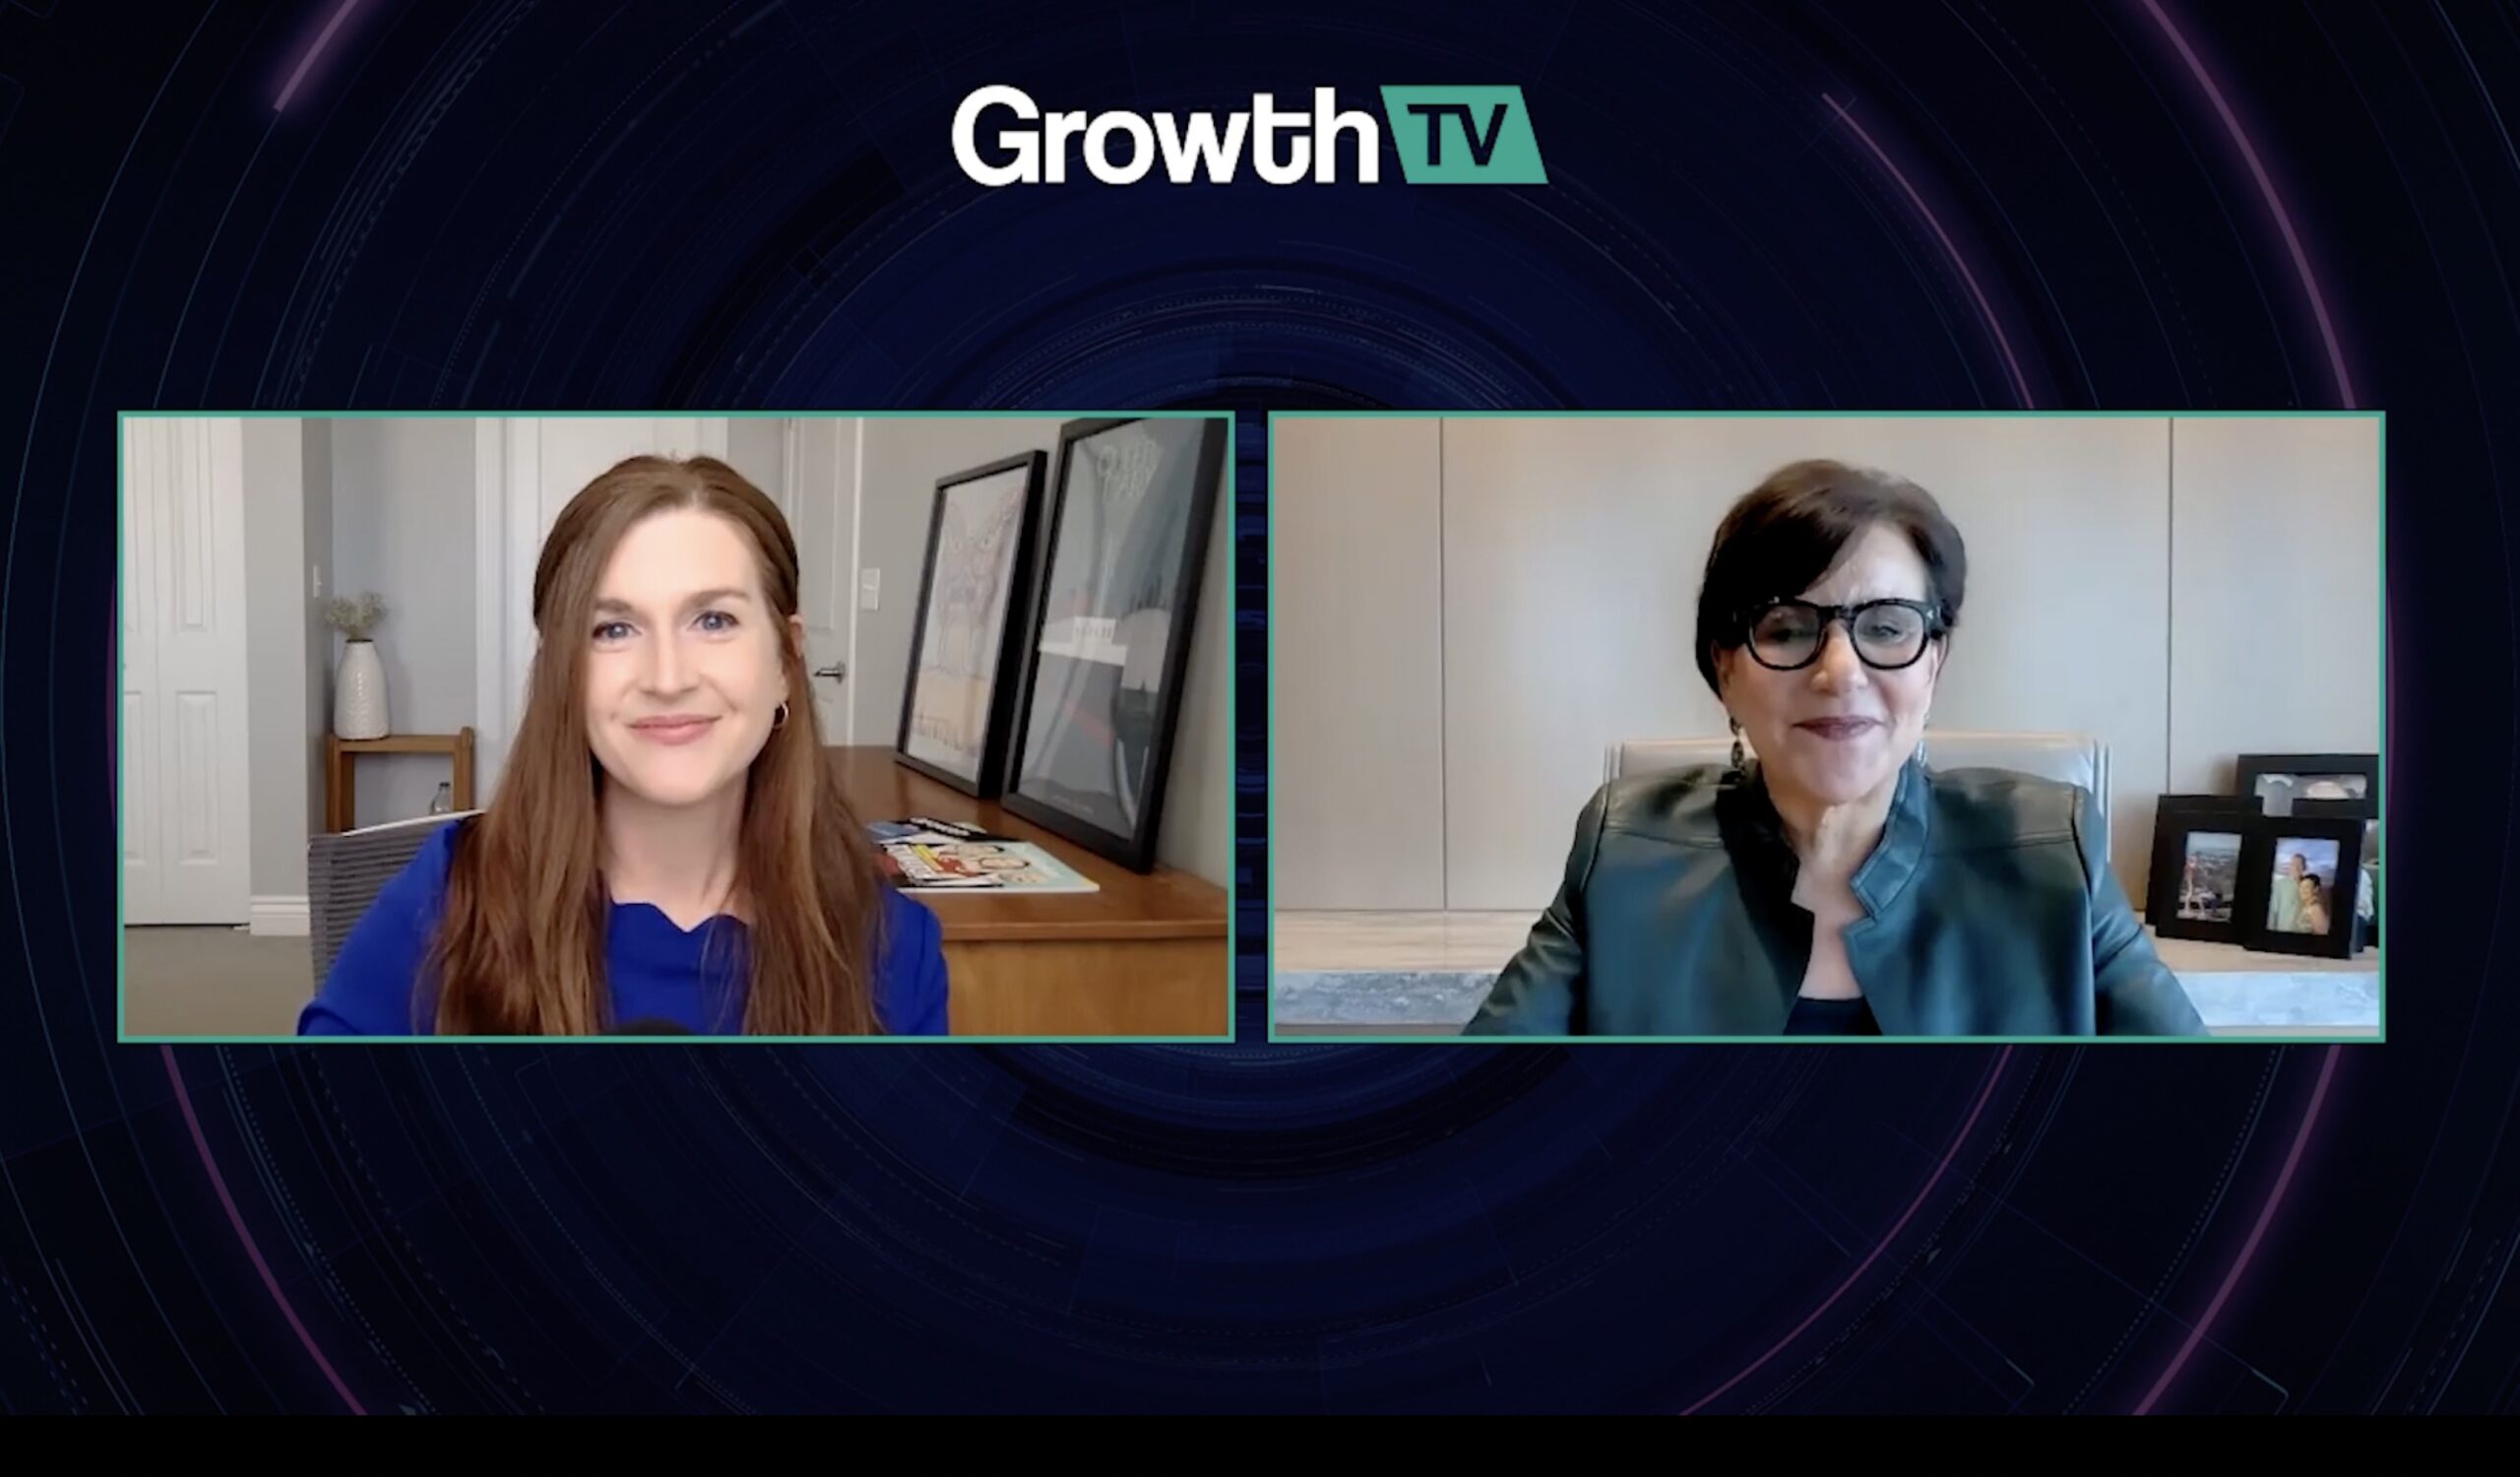 growthtv-penny-pritzker-investing-ideals